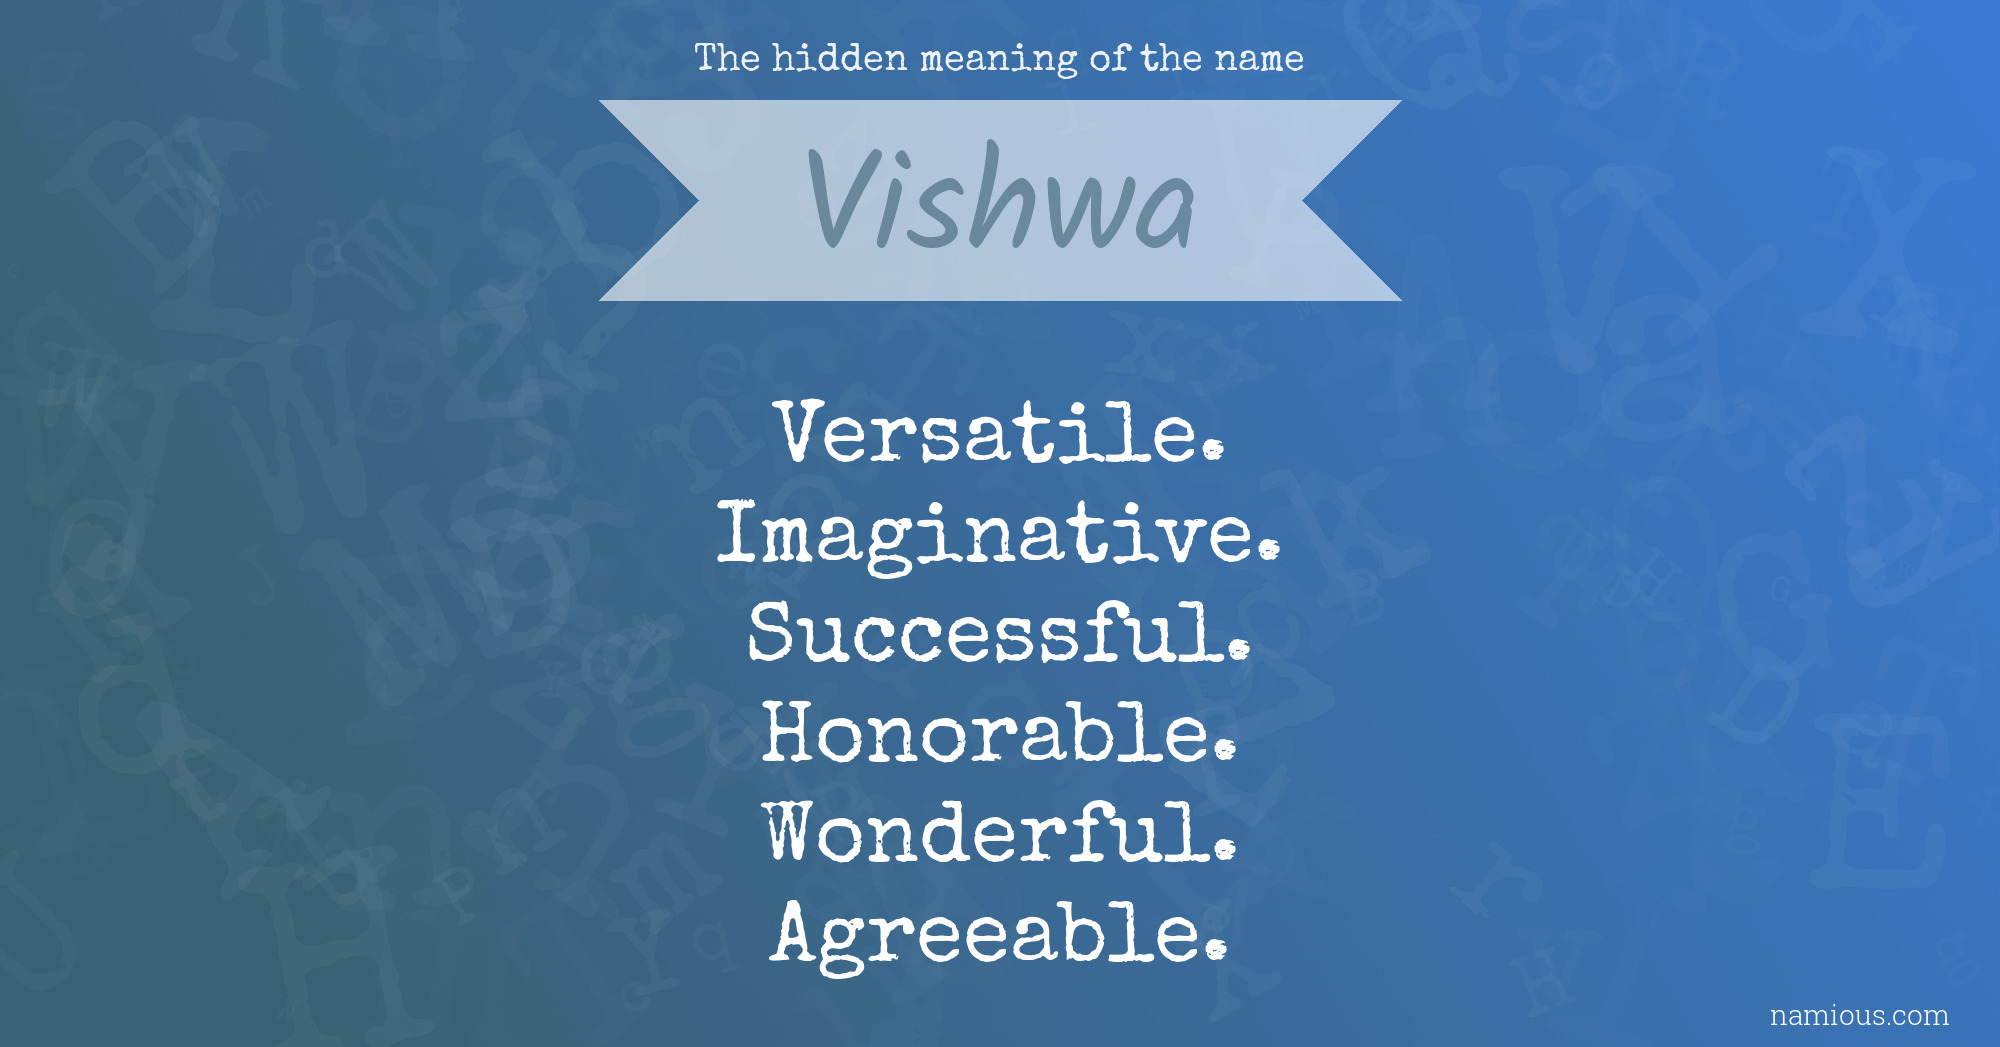 The hidden meaning of the name Vishwa